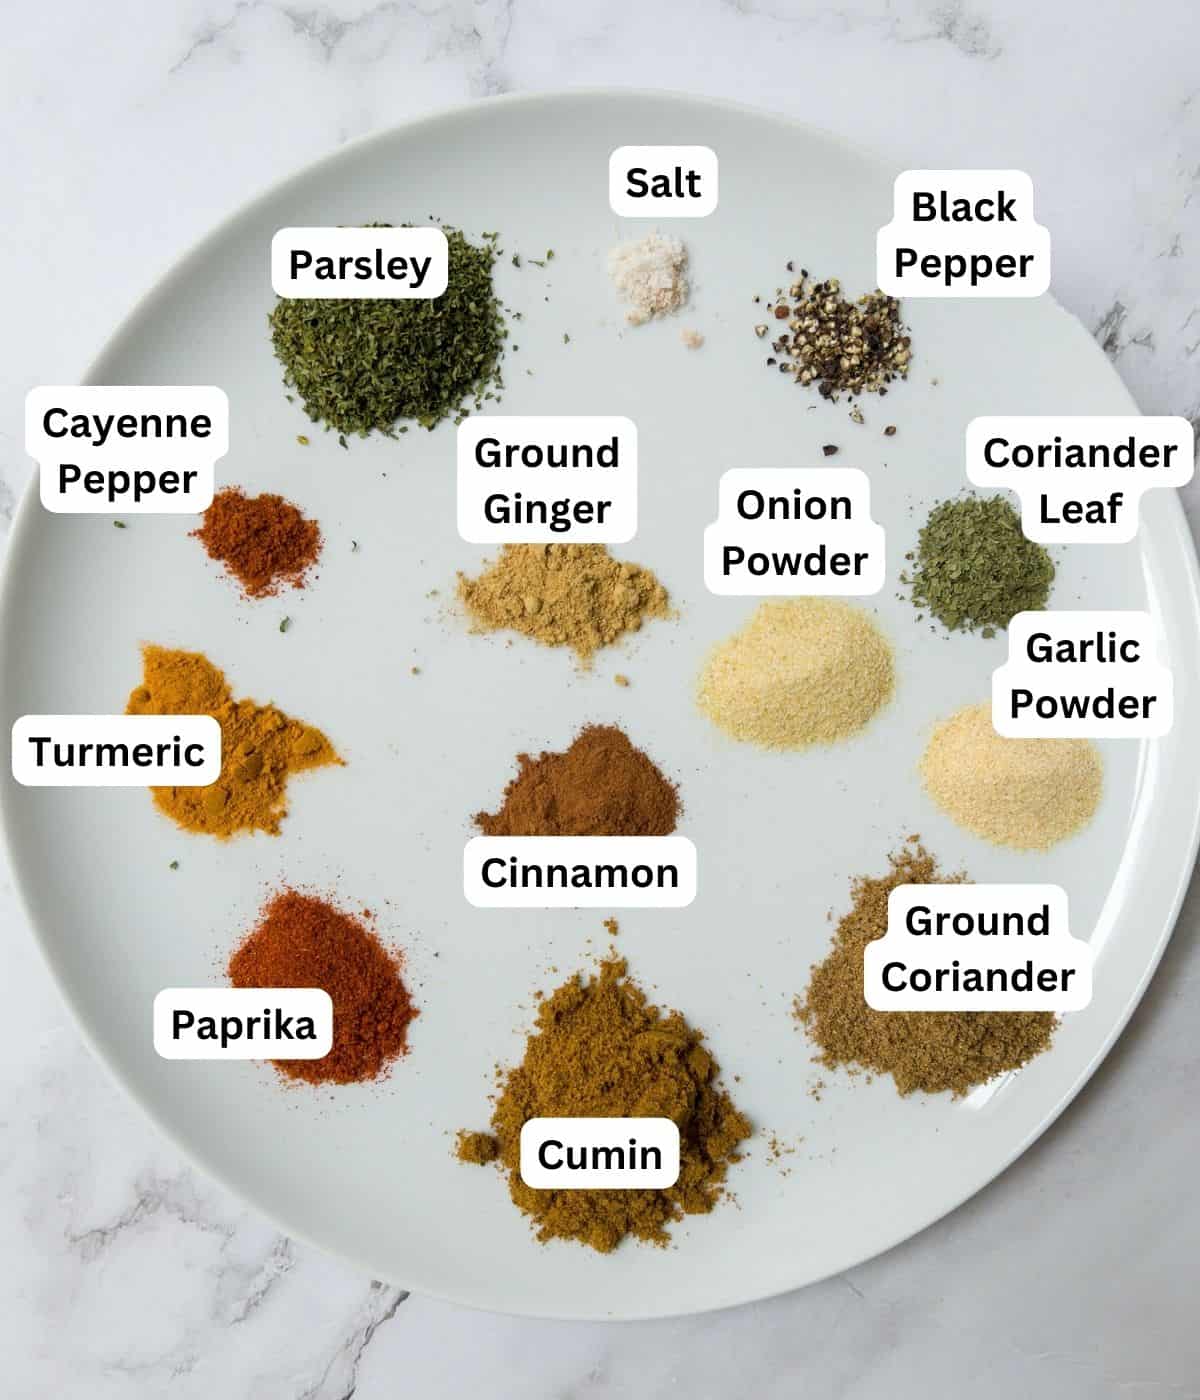 Ingredients laid out on a white plate for chermoula spice blend.